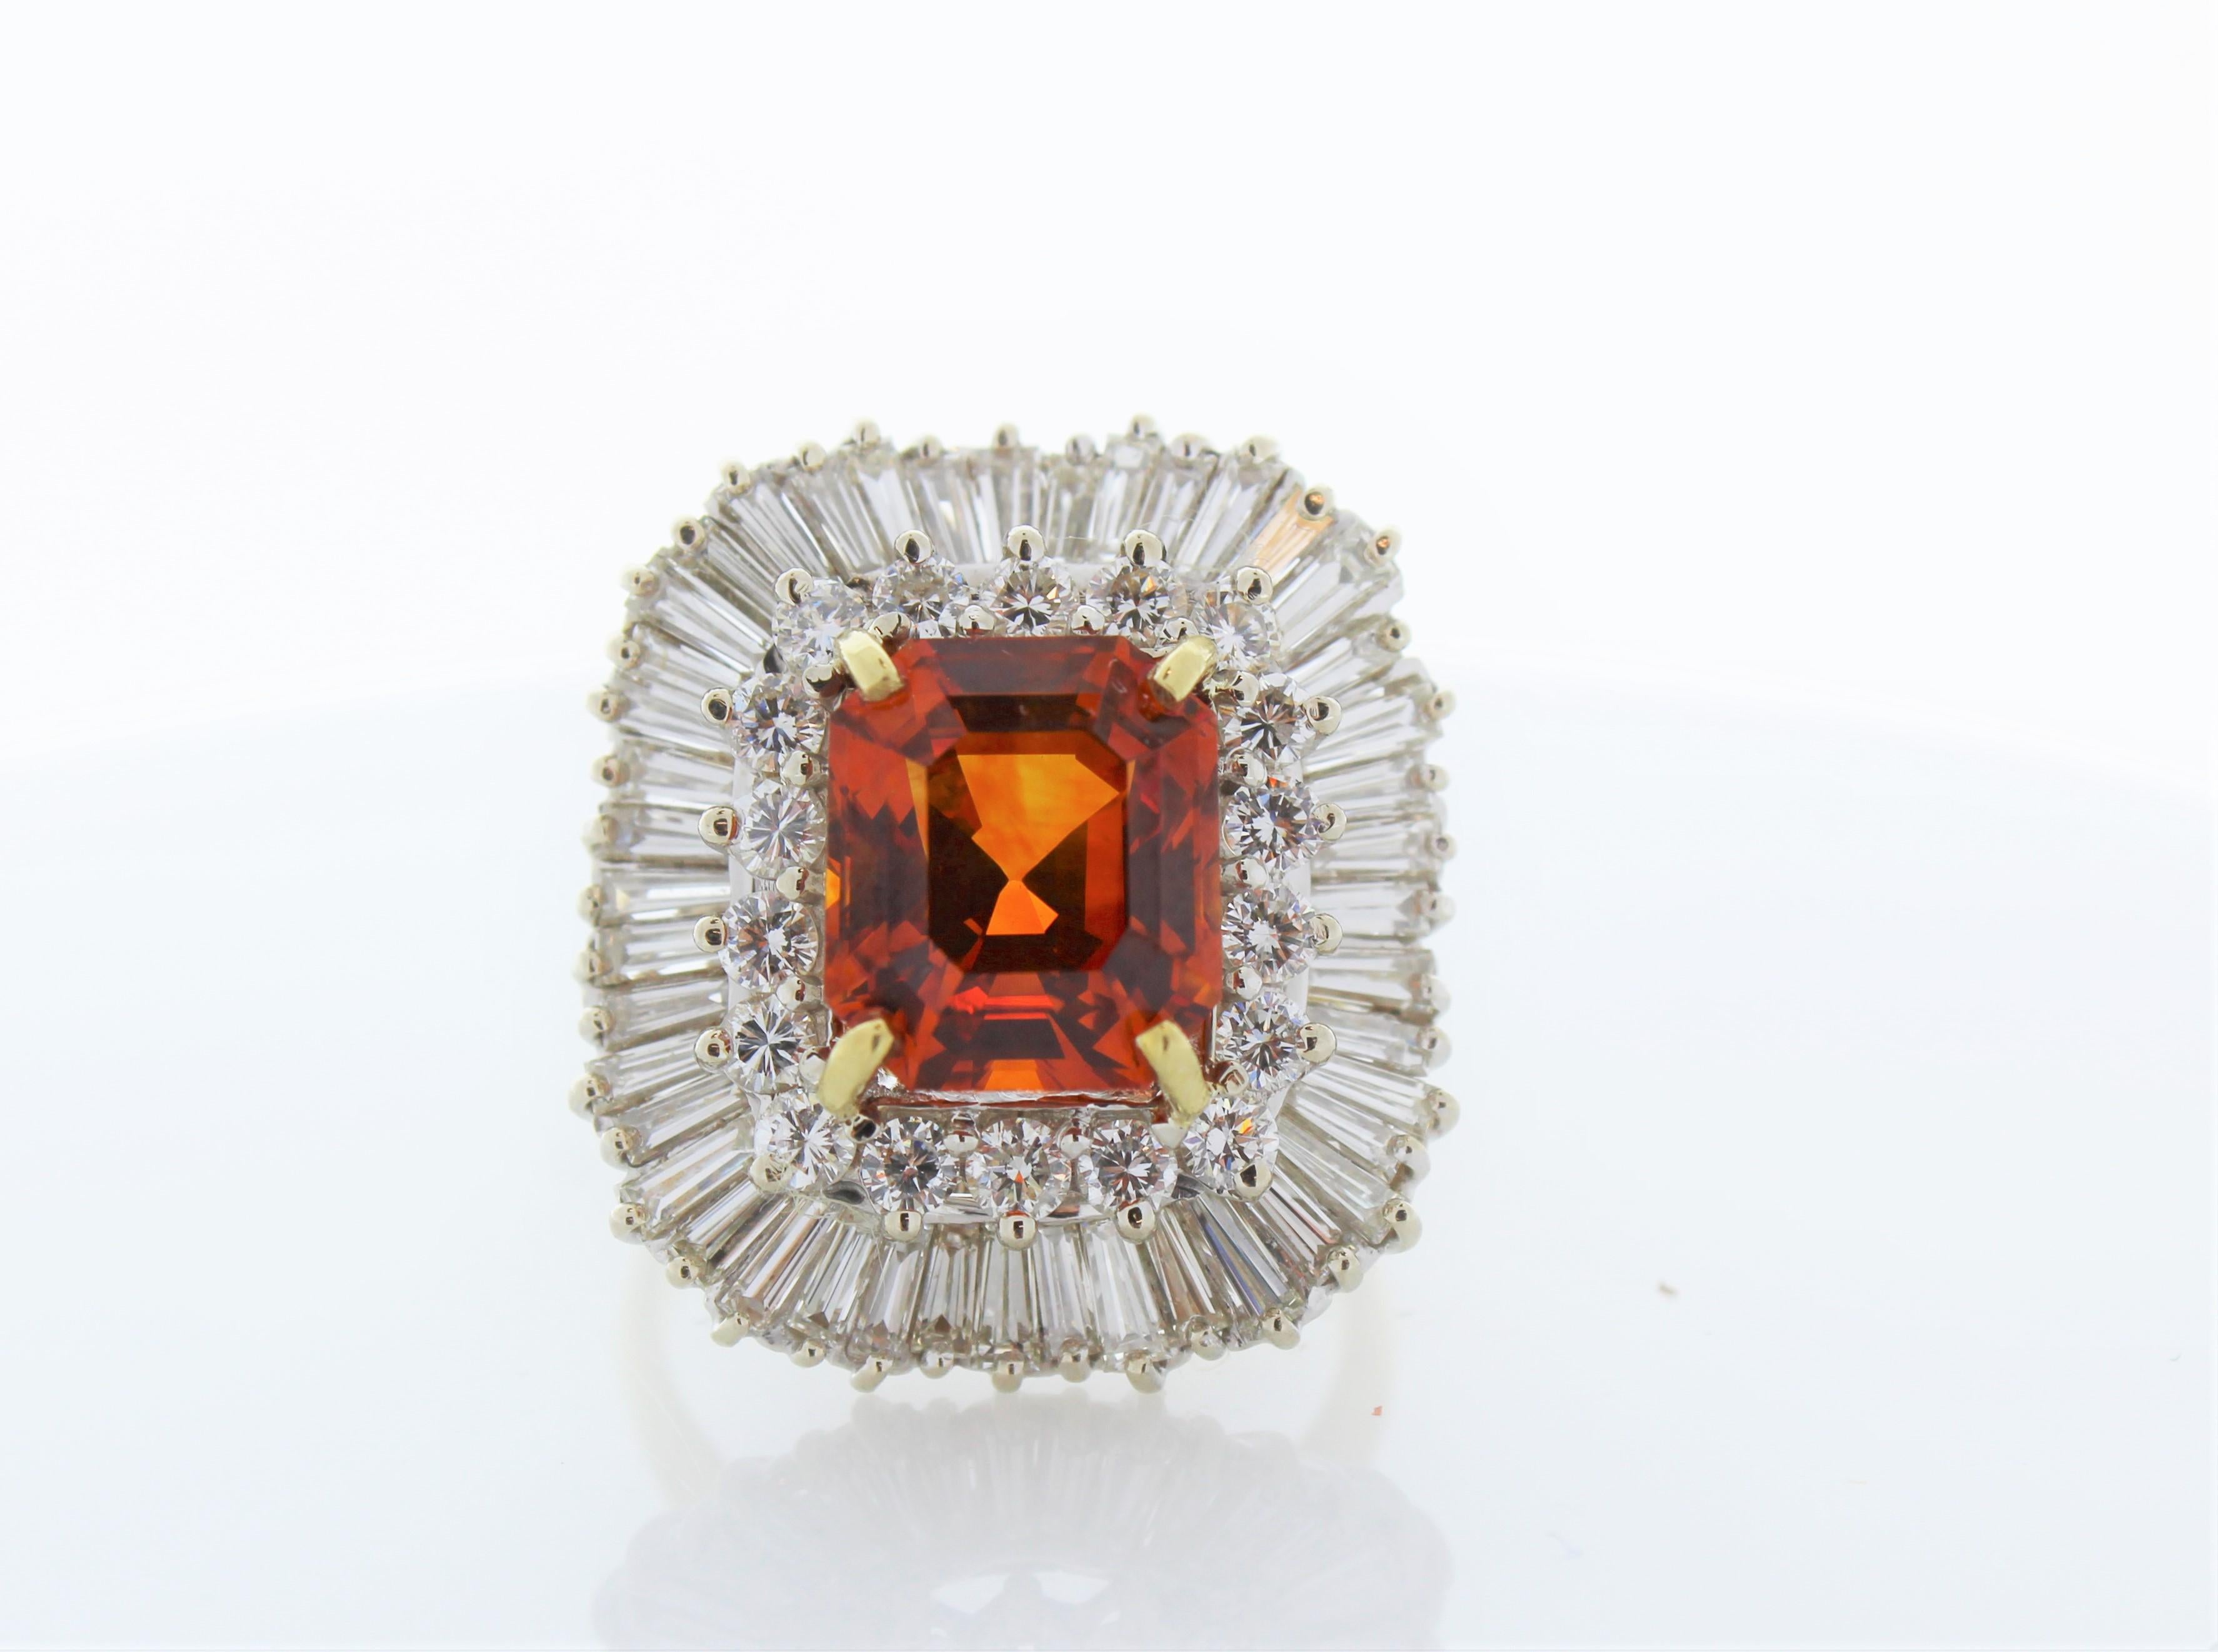 The 7.70 Carat Emerald Cut Orange Sapphire and Diamond Ring in 18K White Gold is a truly exquisite and captivating piece of fine jewelry that beautifully combines the richness of a rare orange sapphire with the timeless elegance of white gold and